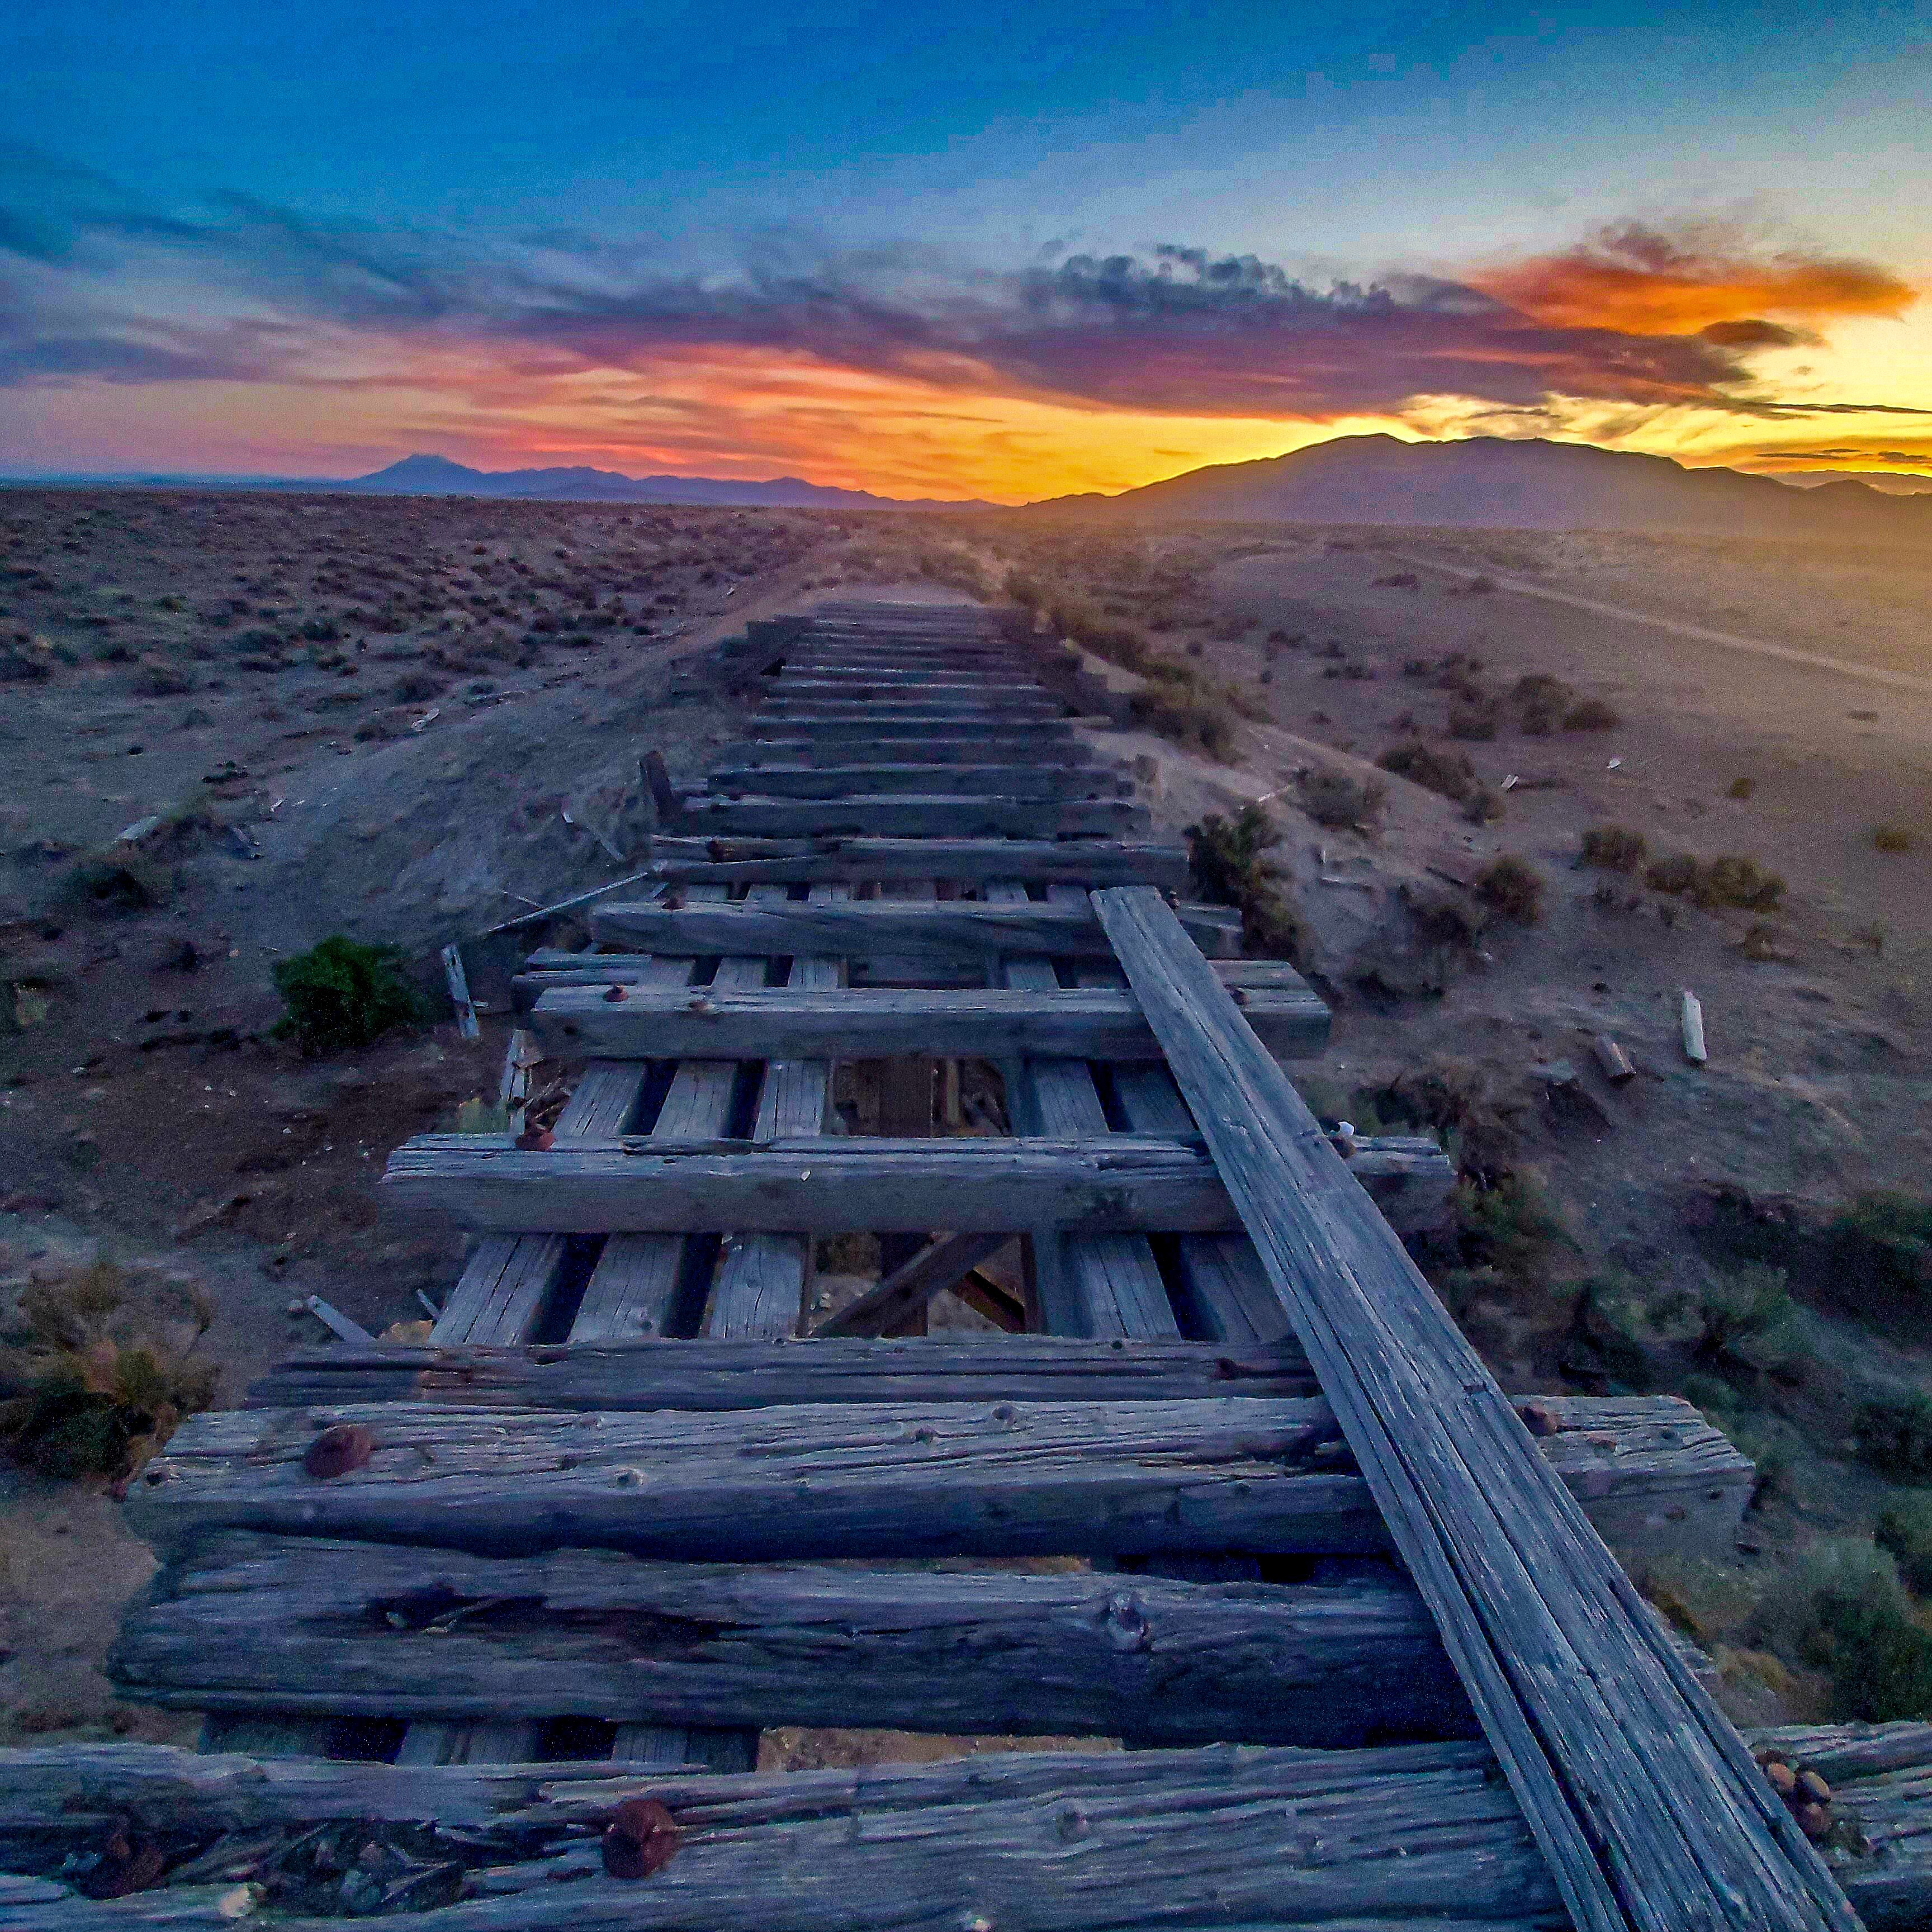 The remnants of an old stretch of America’s transcontinental railroad near Terrace, Utah. Photo: Steve Dudrow